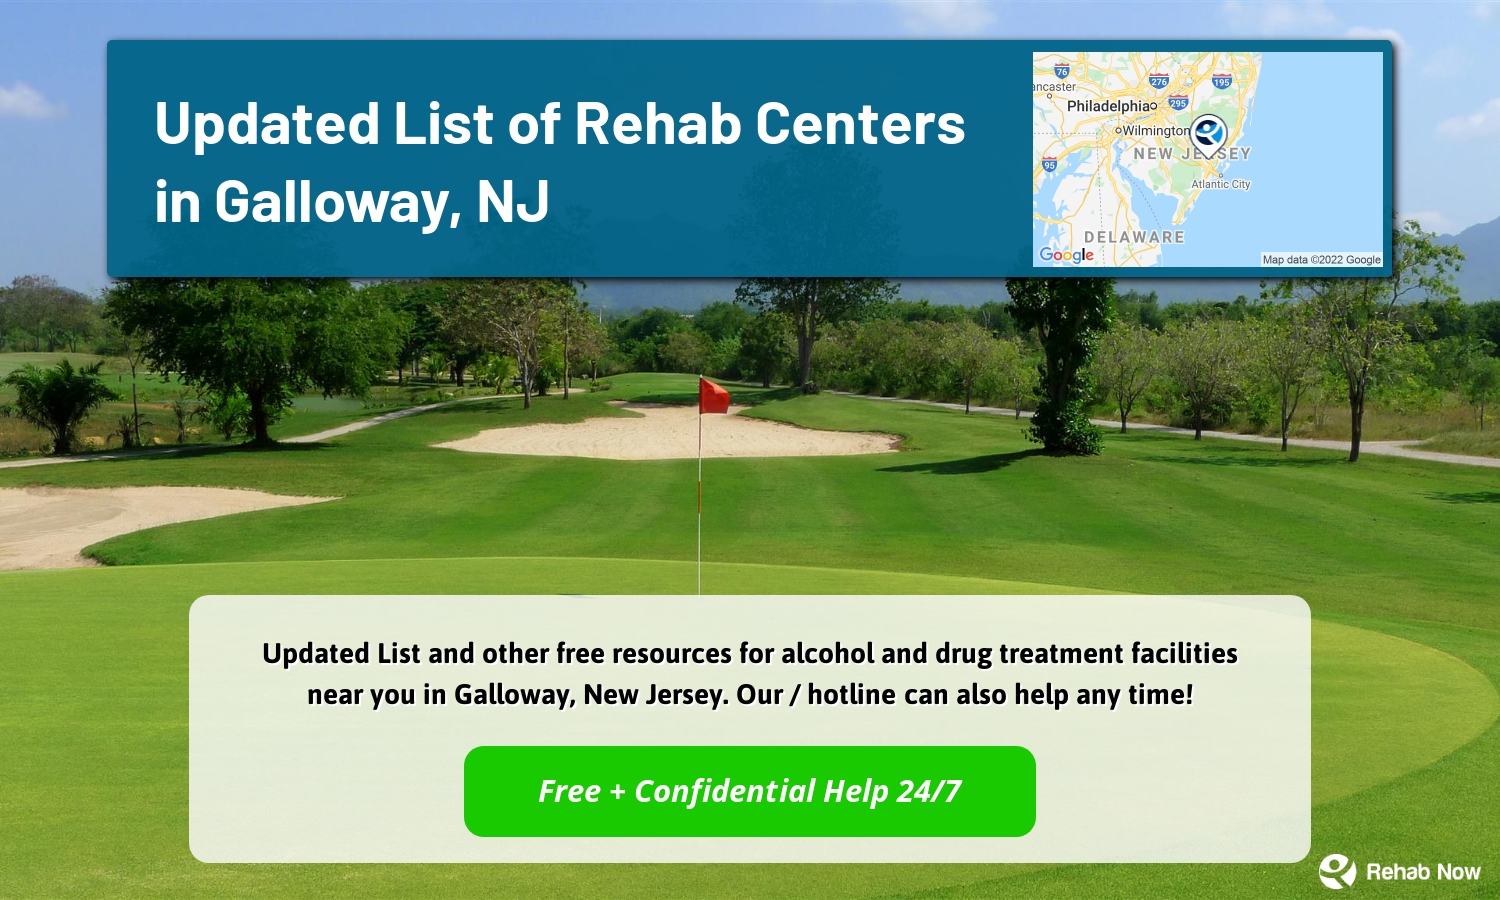  Updated List and other free resources for alcohol and drug treatment facilities near you in Galloway, New Jersey. Our / hotline can also help any time!